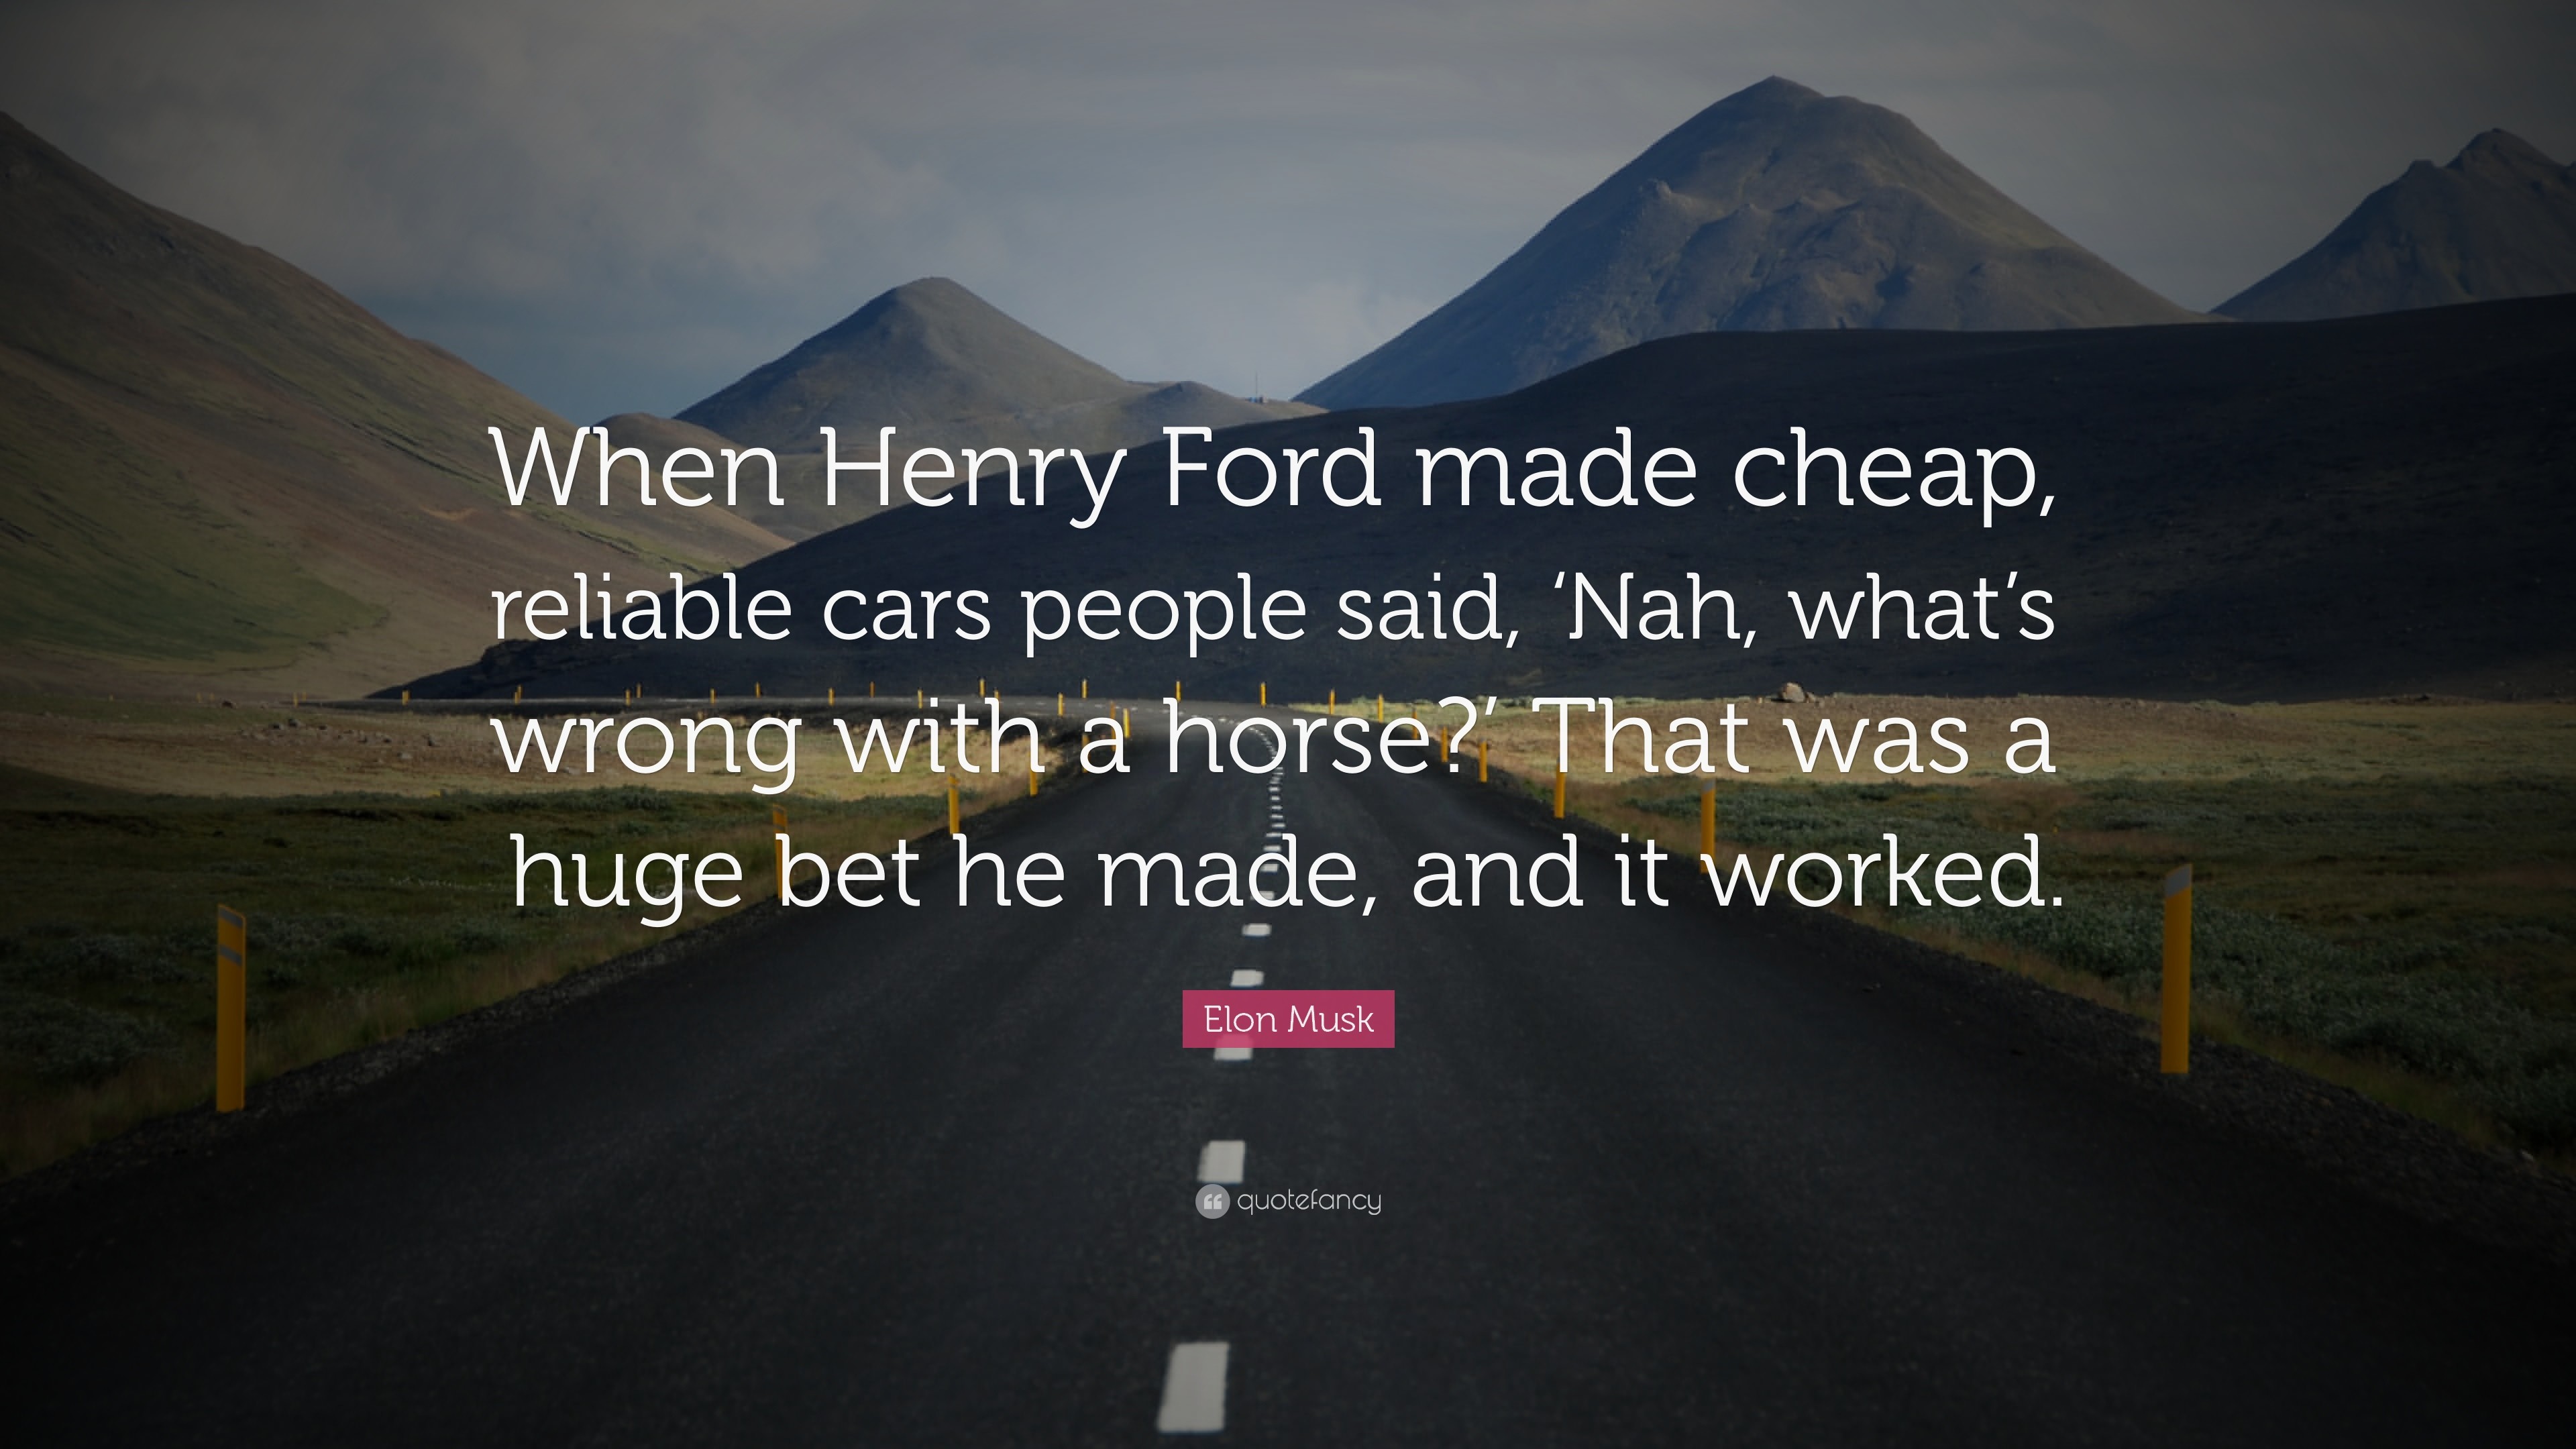 Elon Musk Quote: “When Henry Ford made cheap, reliable cars people said,